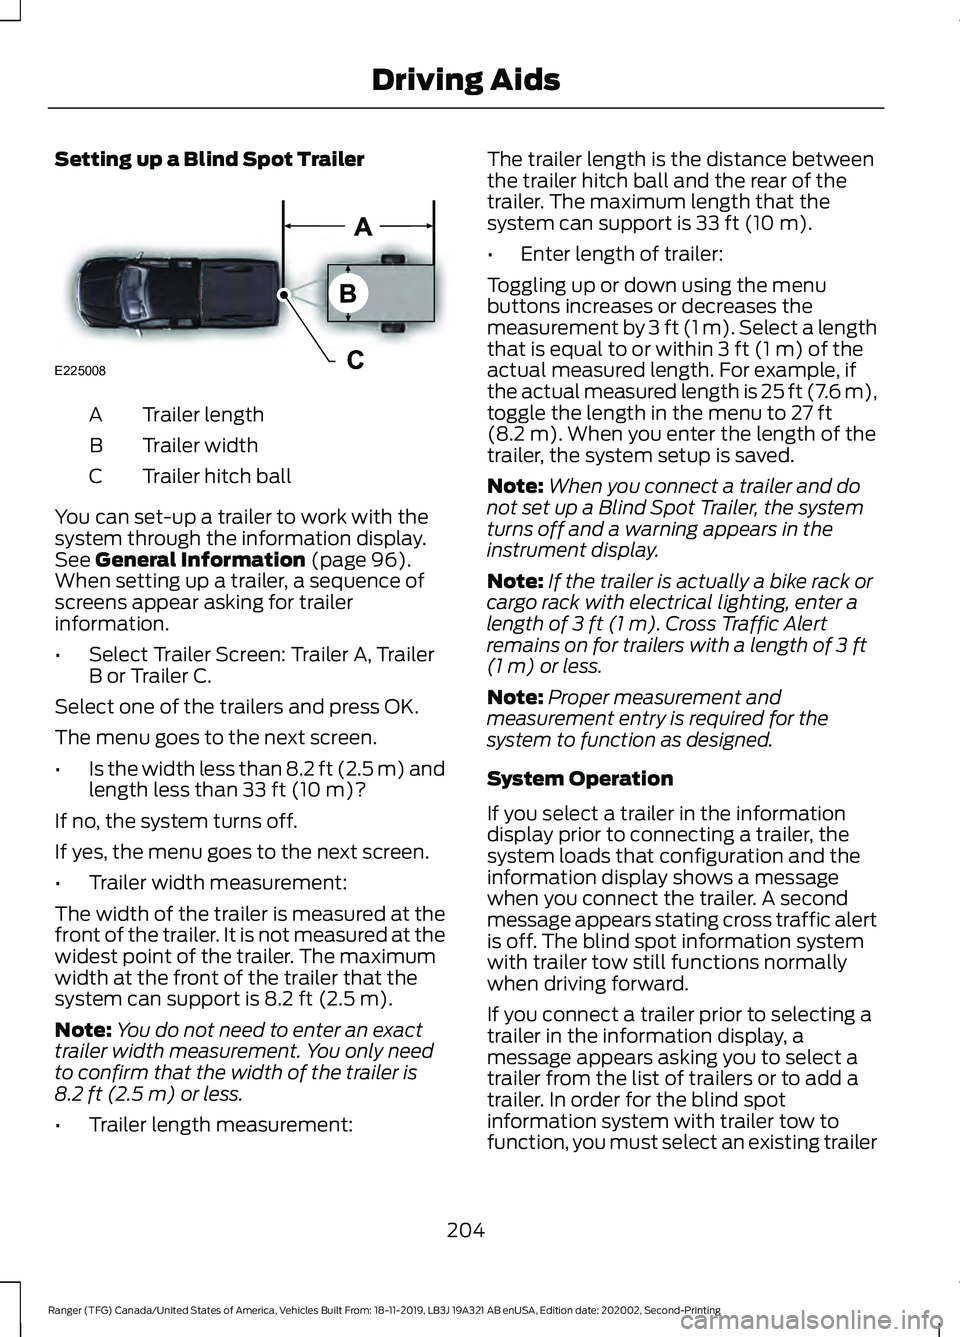 FORD RANGER 2020  Owners Manual Setting up a Blind Spot Trailer
Trailer length
A
Trailer width
B
Trailer hitch ball
C
You can set-up a trailer to work with the
system through the information display.
See General Information (page 96